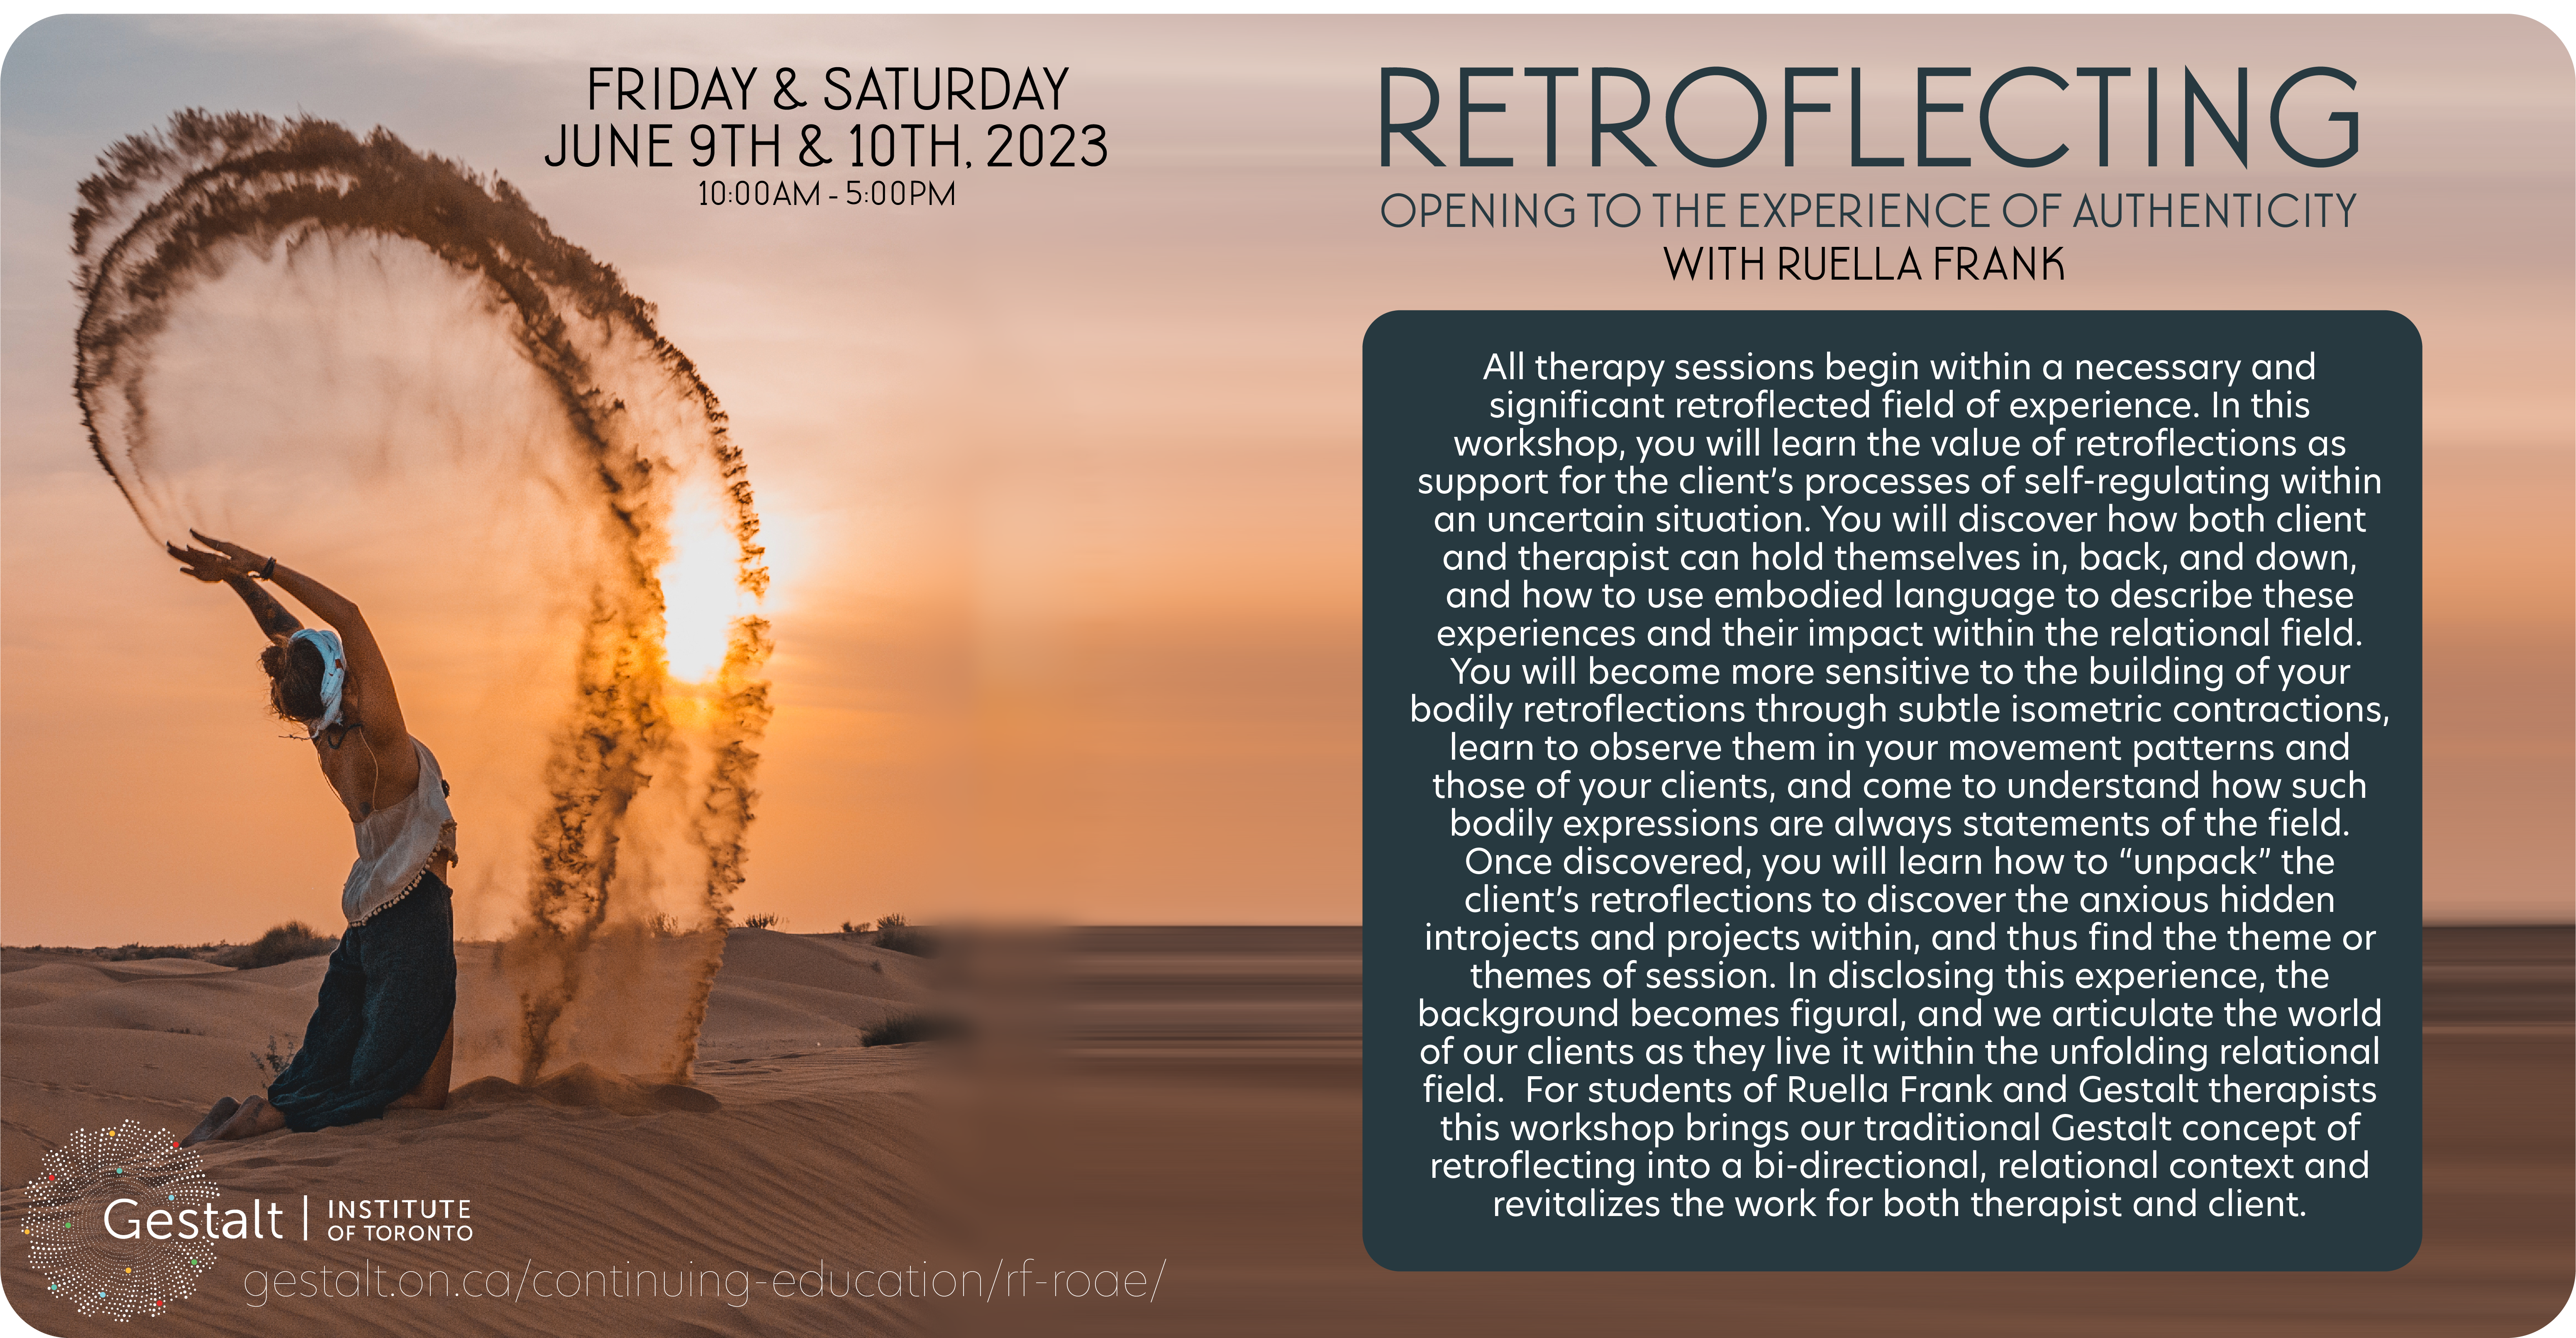 Retroflecting: Opening to the authenticity of experience - event banner showing title and photo of woman on a beach tossing up a cascade of sand